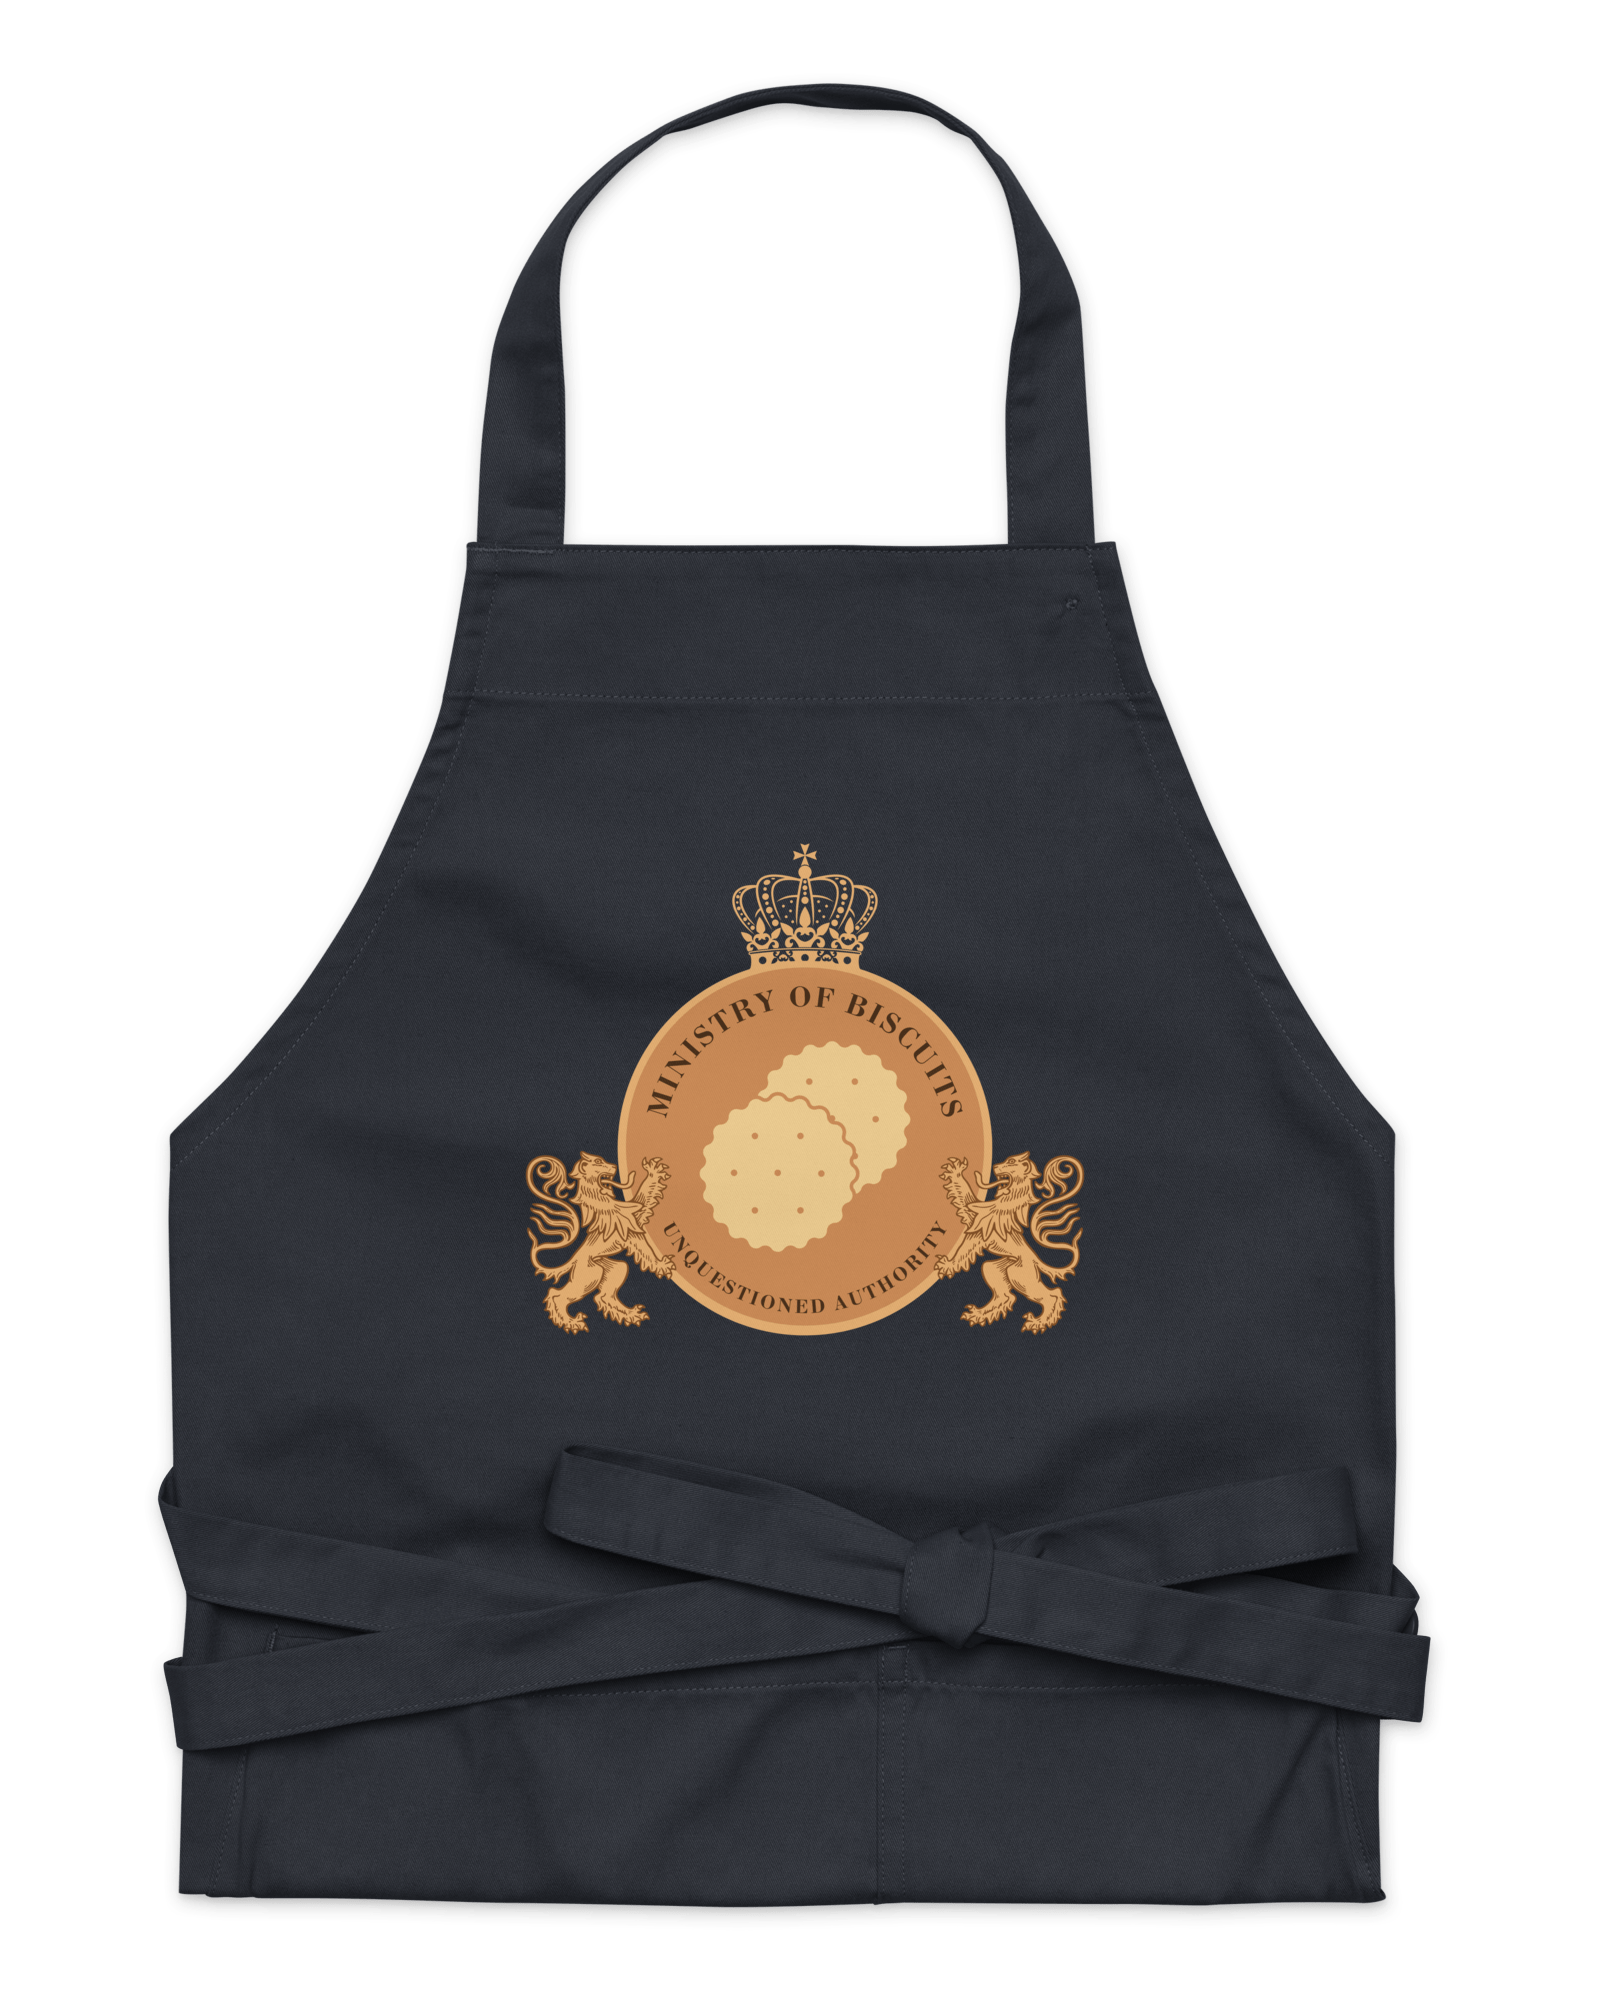 Ministry of Biscuits Organic Cotton Apron Navy Aprons Jolly & Goode